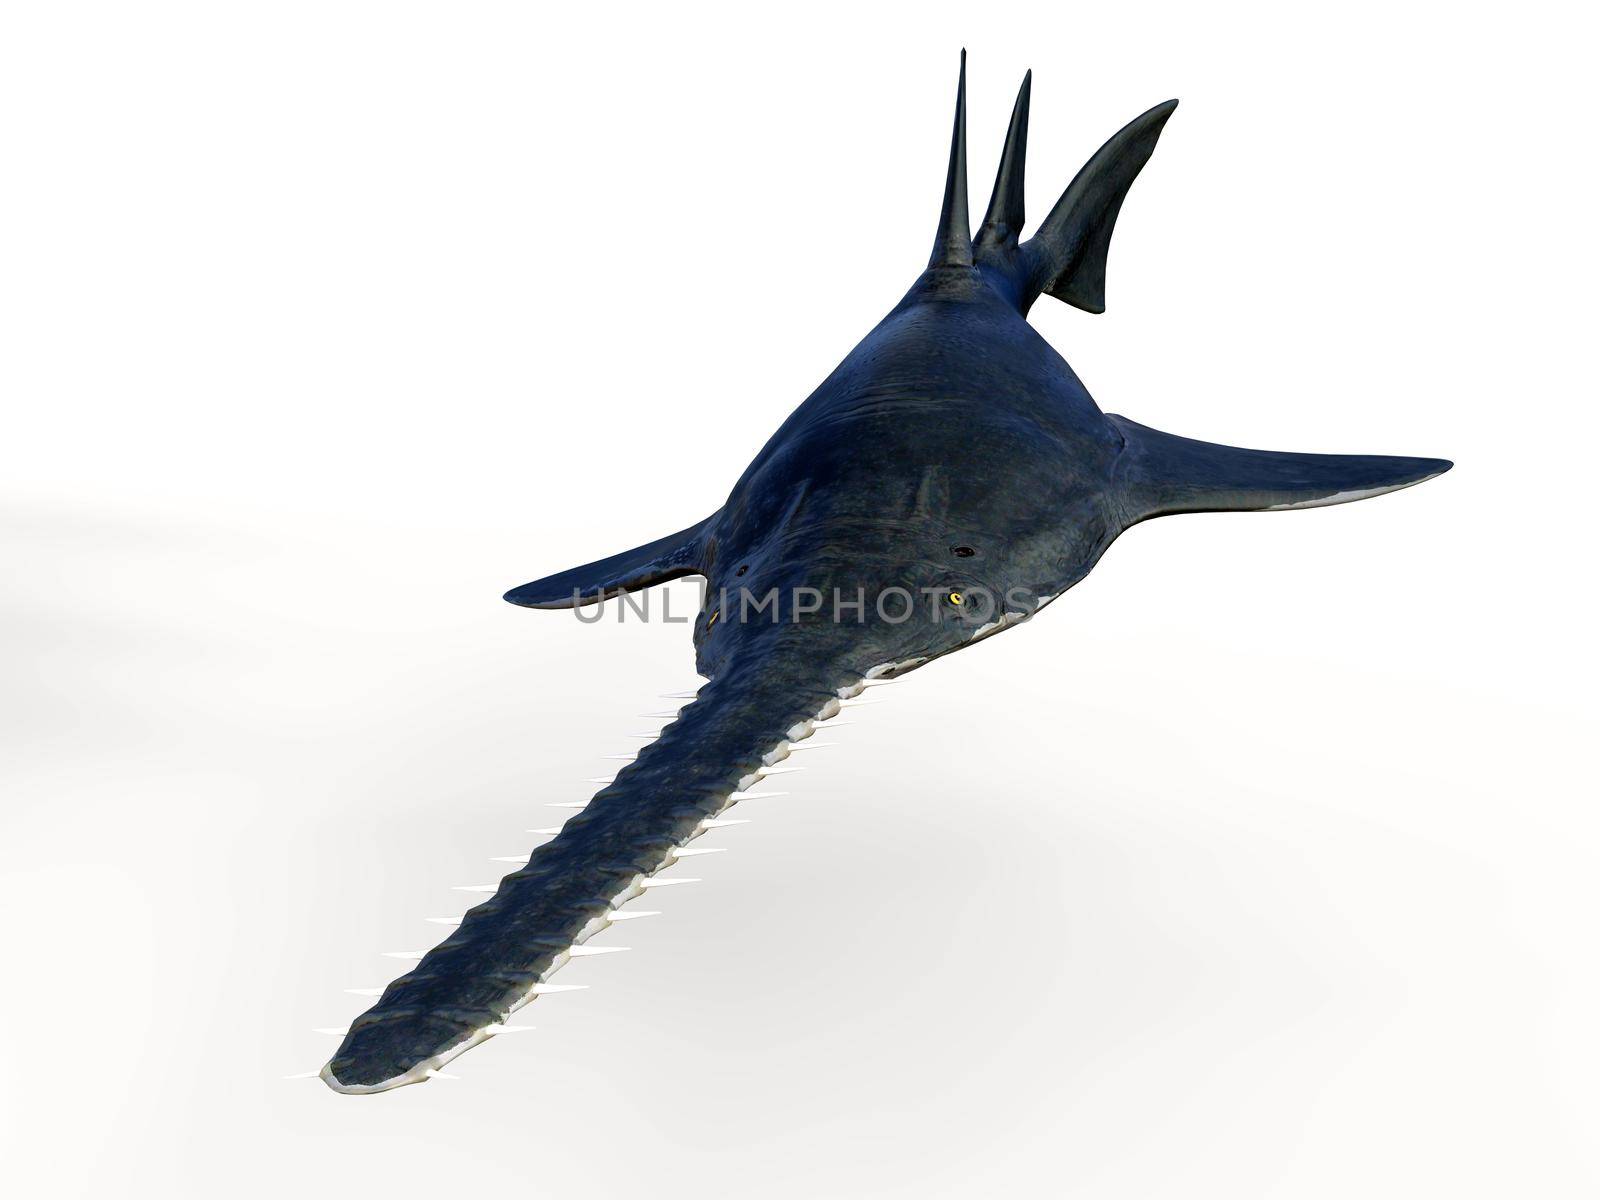 Onchopristis is an extinct predatory sawfish that lived in the seas of North America and North Africa during the Cretaceous Period.